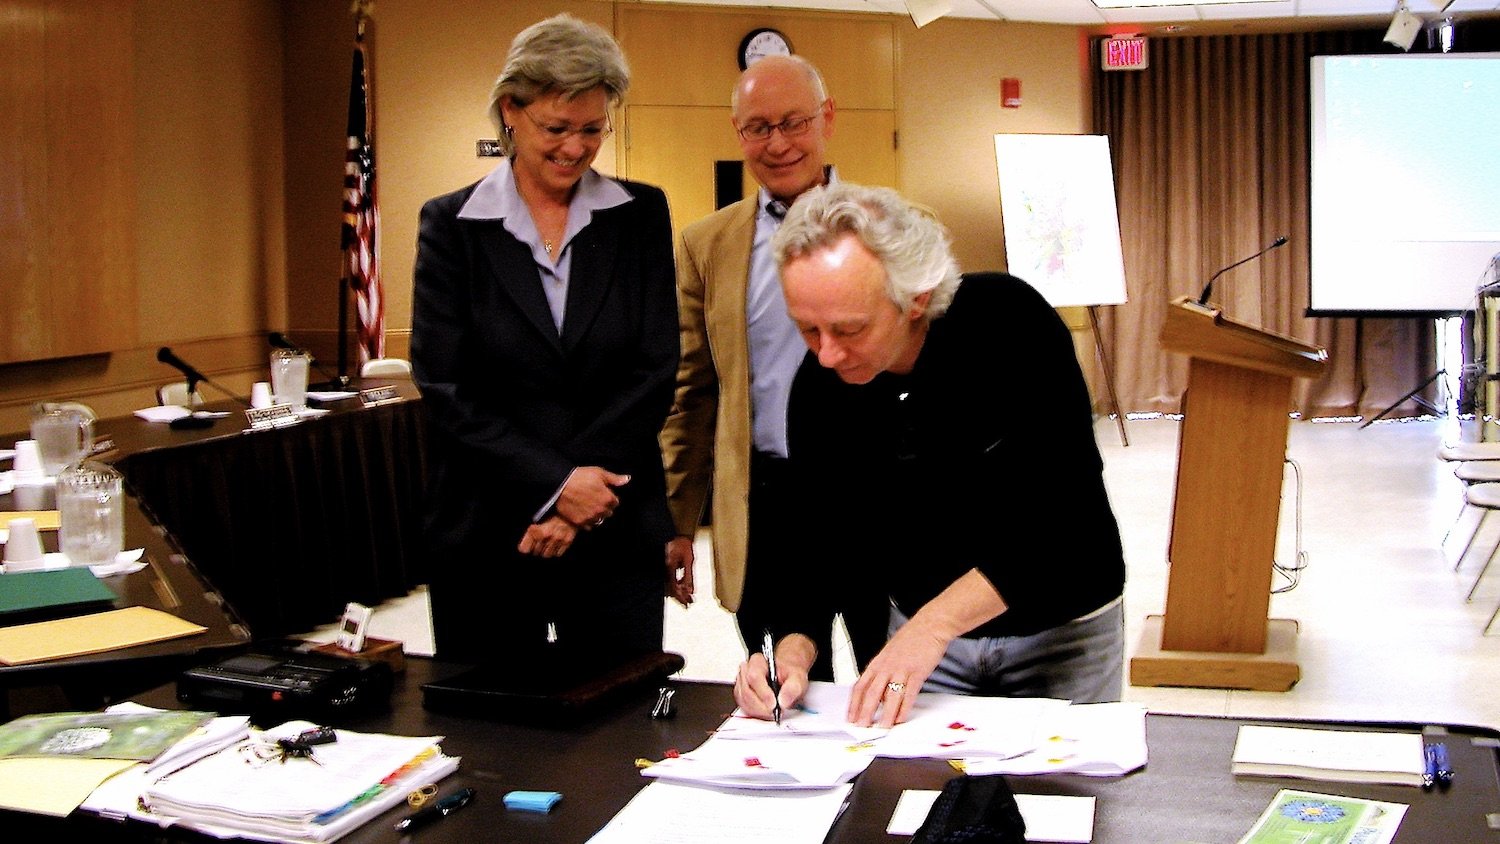   Don Young  signing  Support Agreement  with City of FW. Parks Asst. Dir,  Melody Mitchell  and FOTHNA member,  Jim Marshall , look on. 